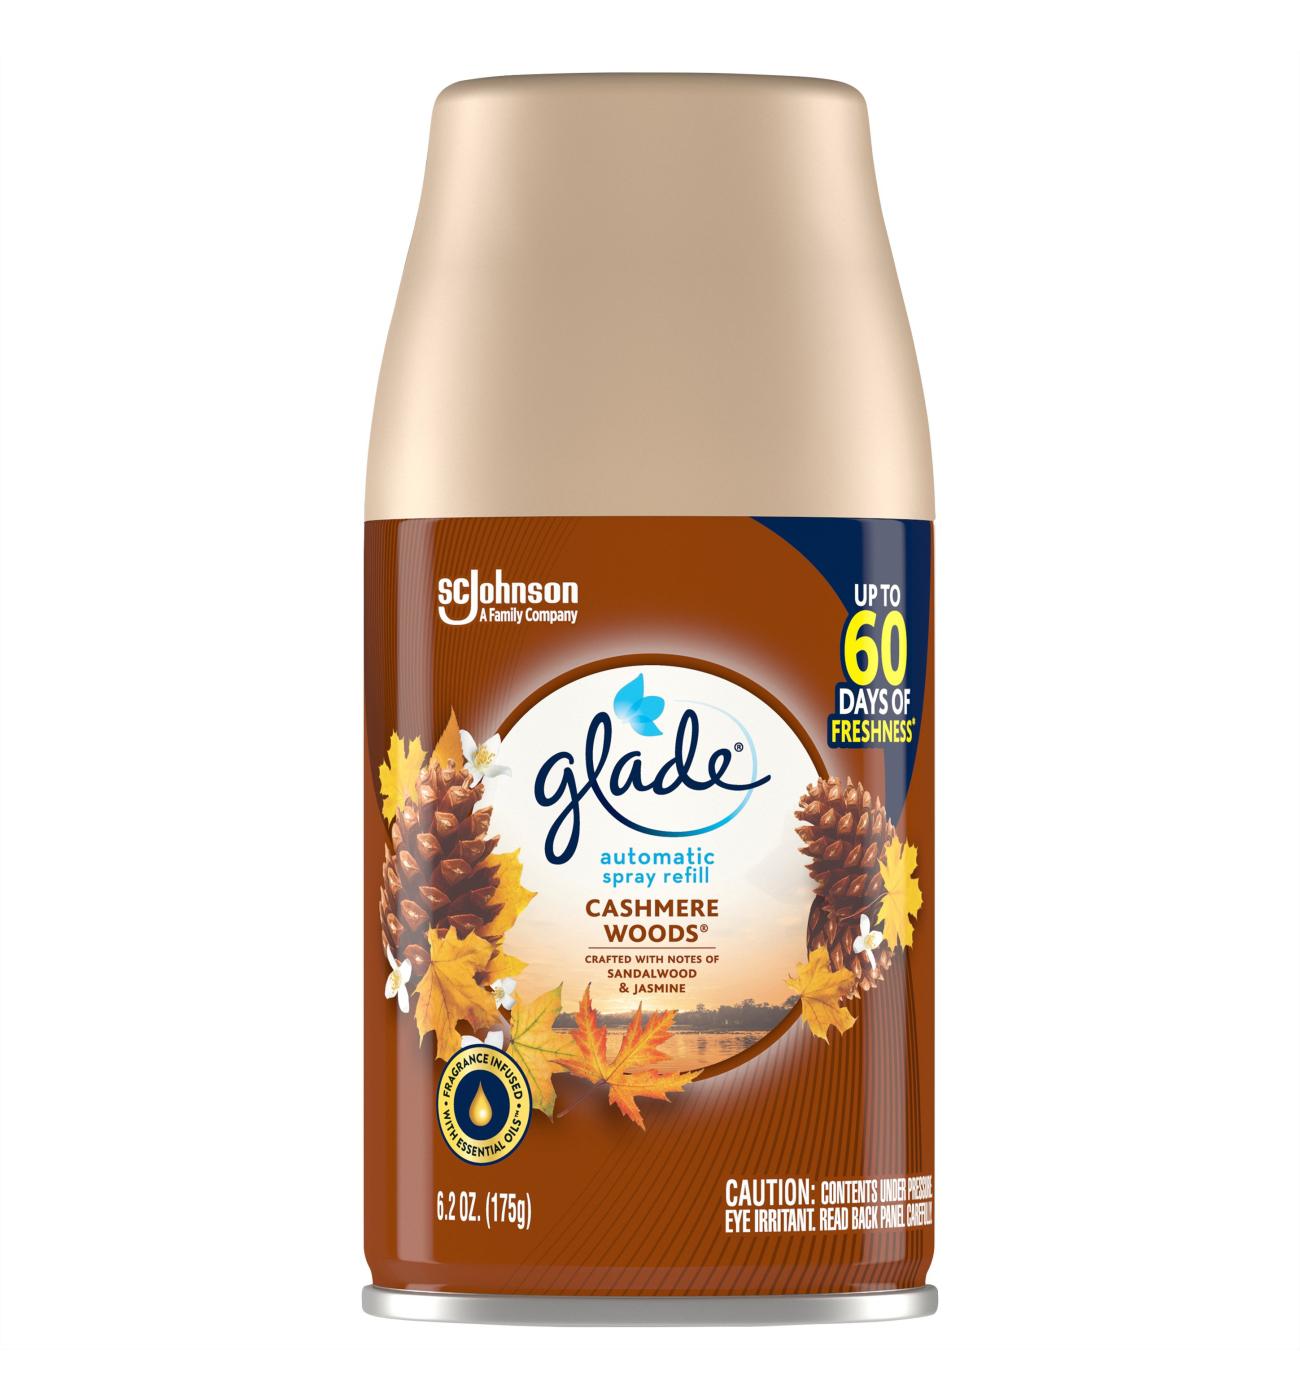 Glade Automatic Spray Refill - Cashmere Woods; image 1 of 2